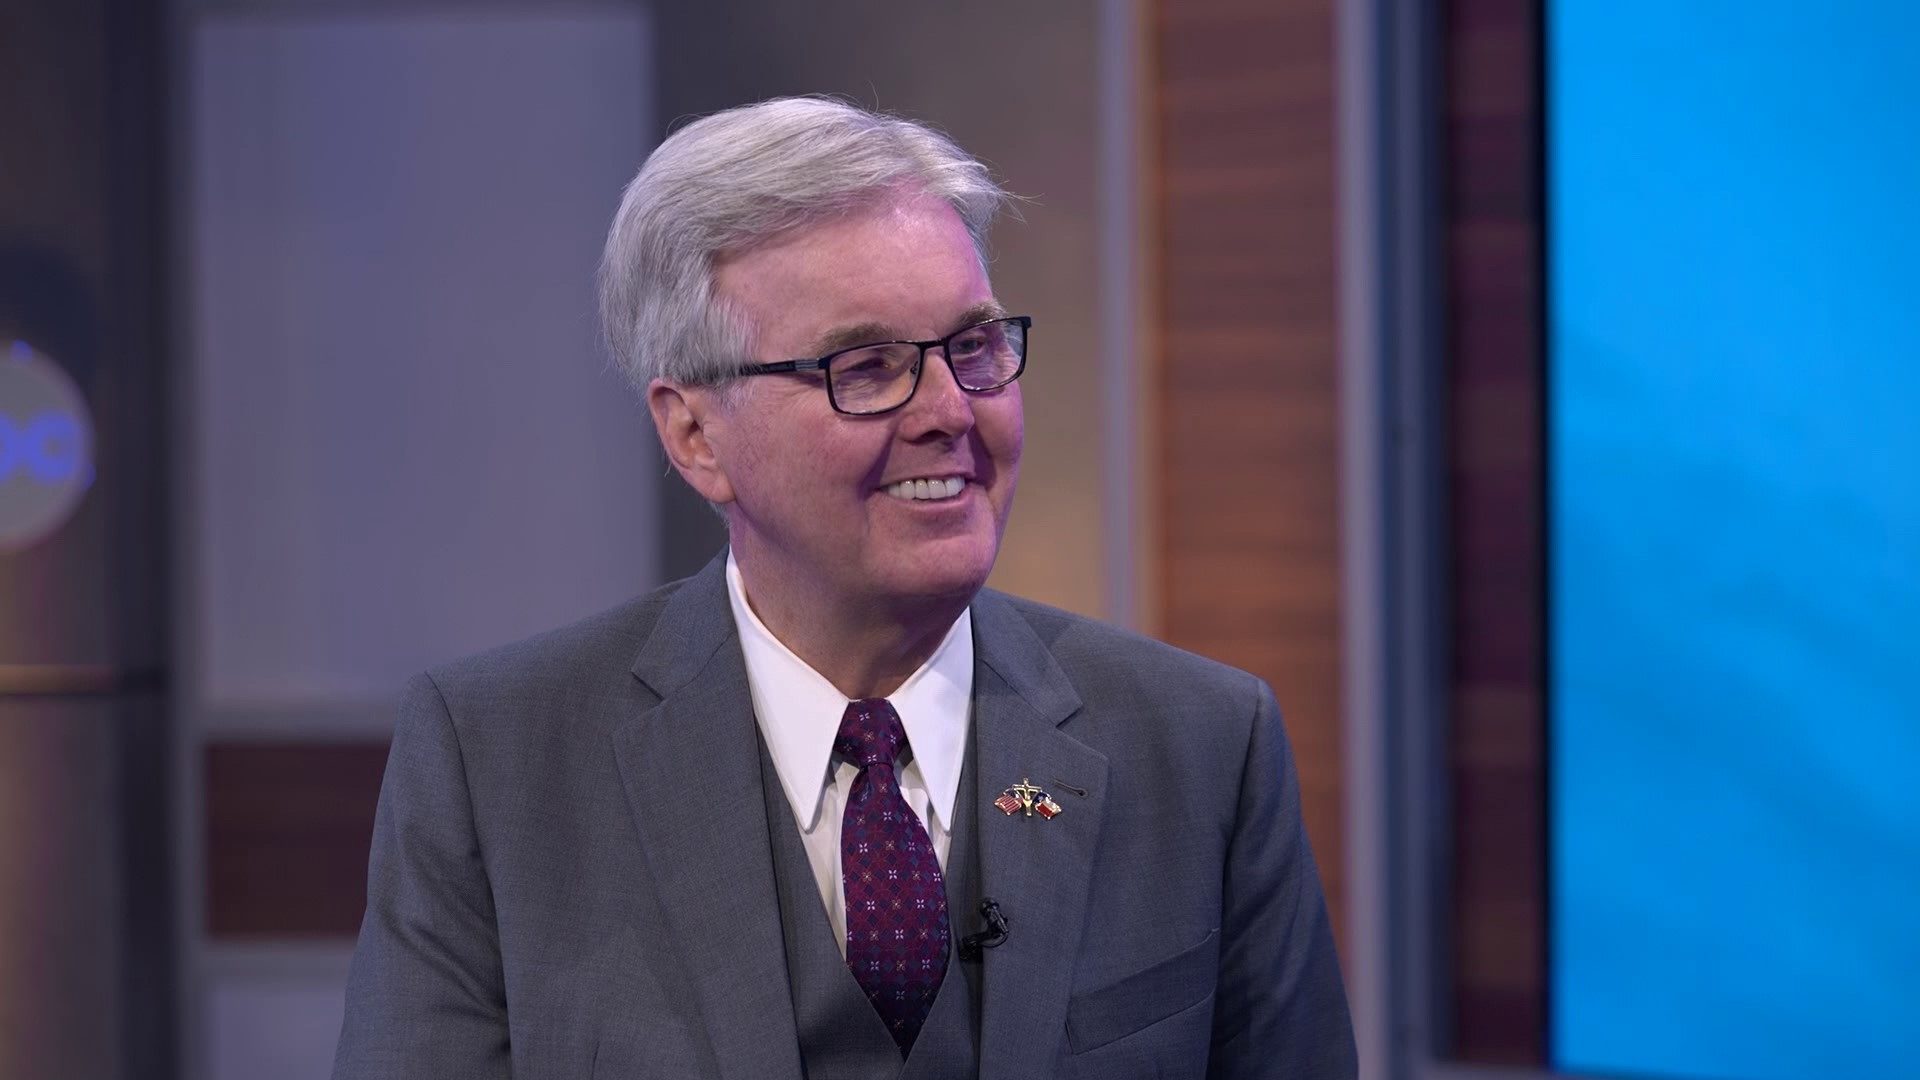 Dan Patrick sits down with Jason Whitely to talk about everything from saving Texans money to school choice.